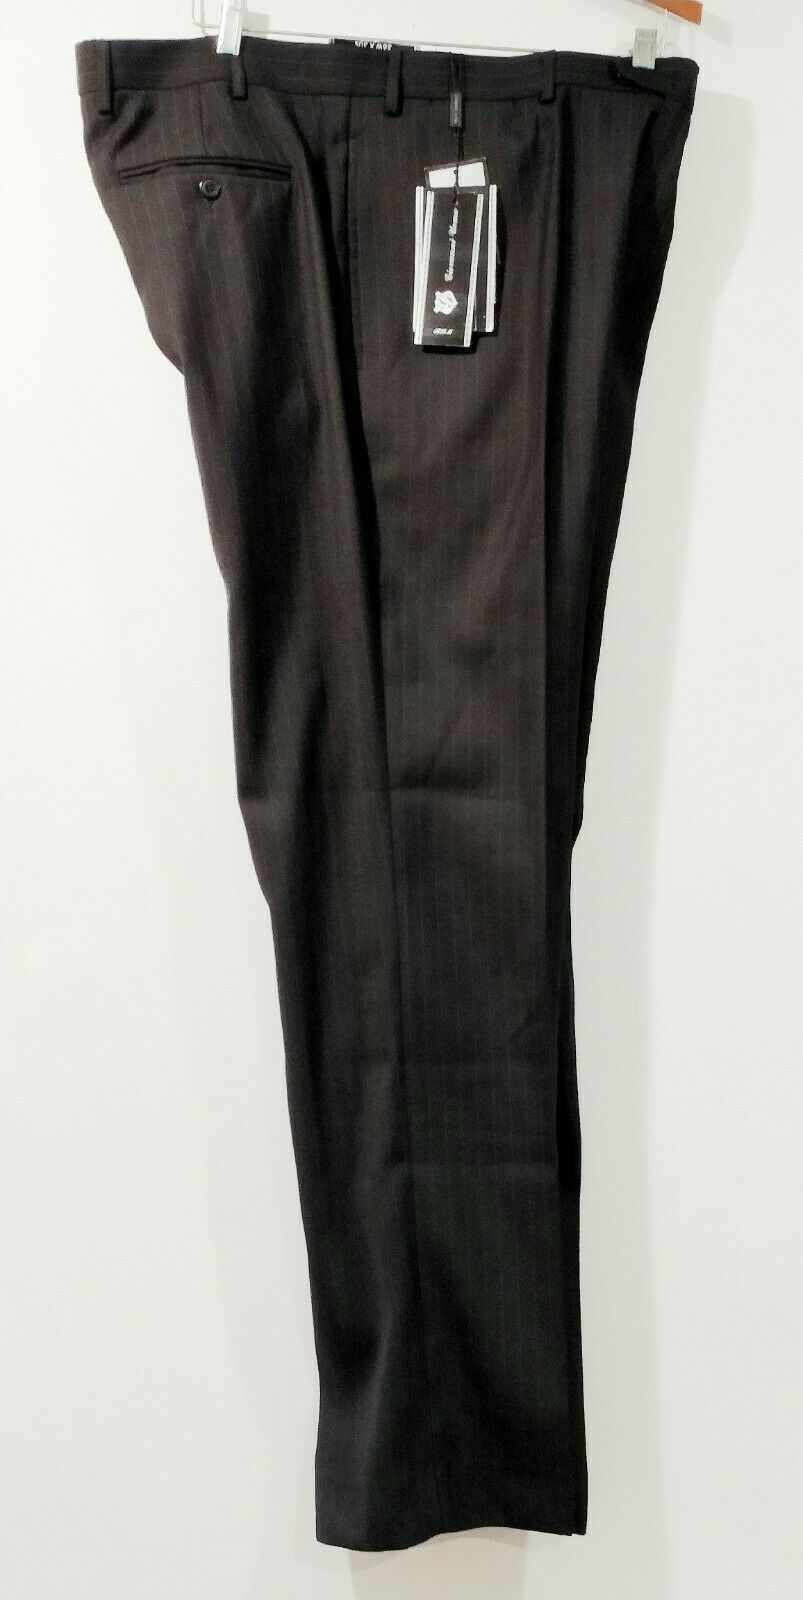 NWT Men Dress Pants by Signature Collection Size 44 inseam 27, 30 Black Color